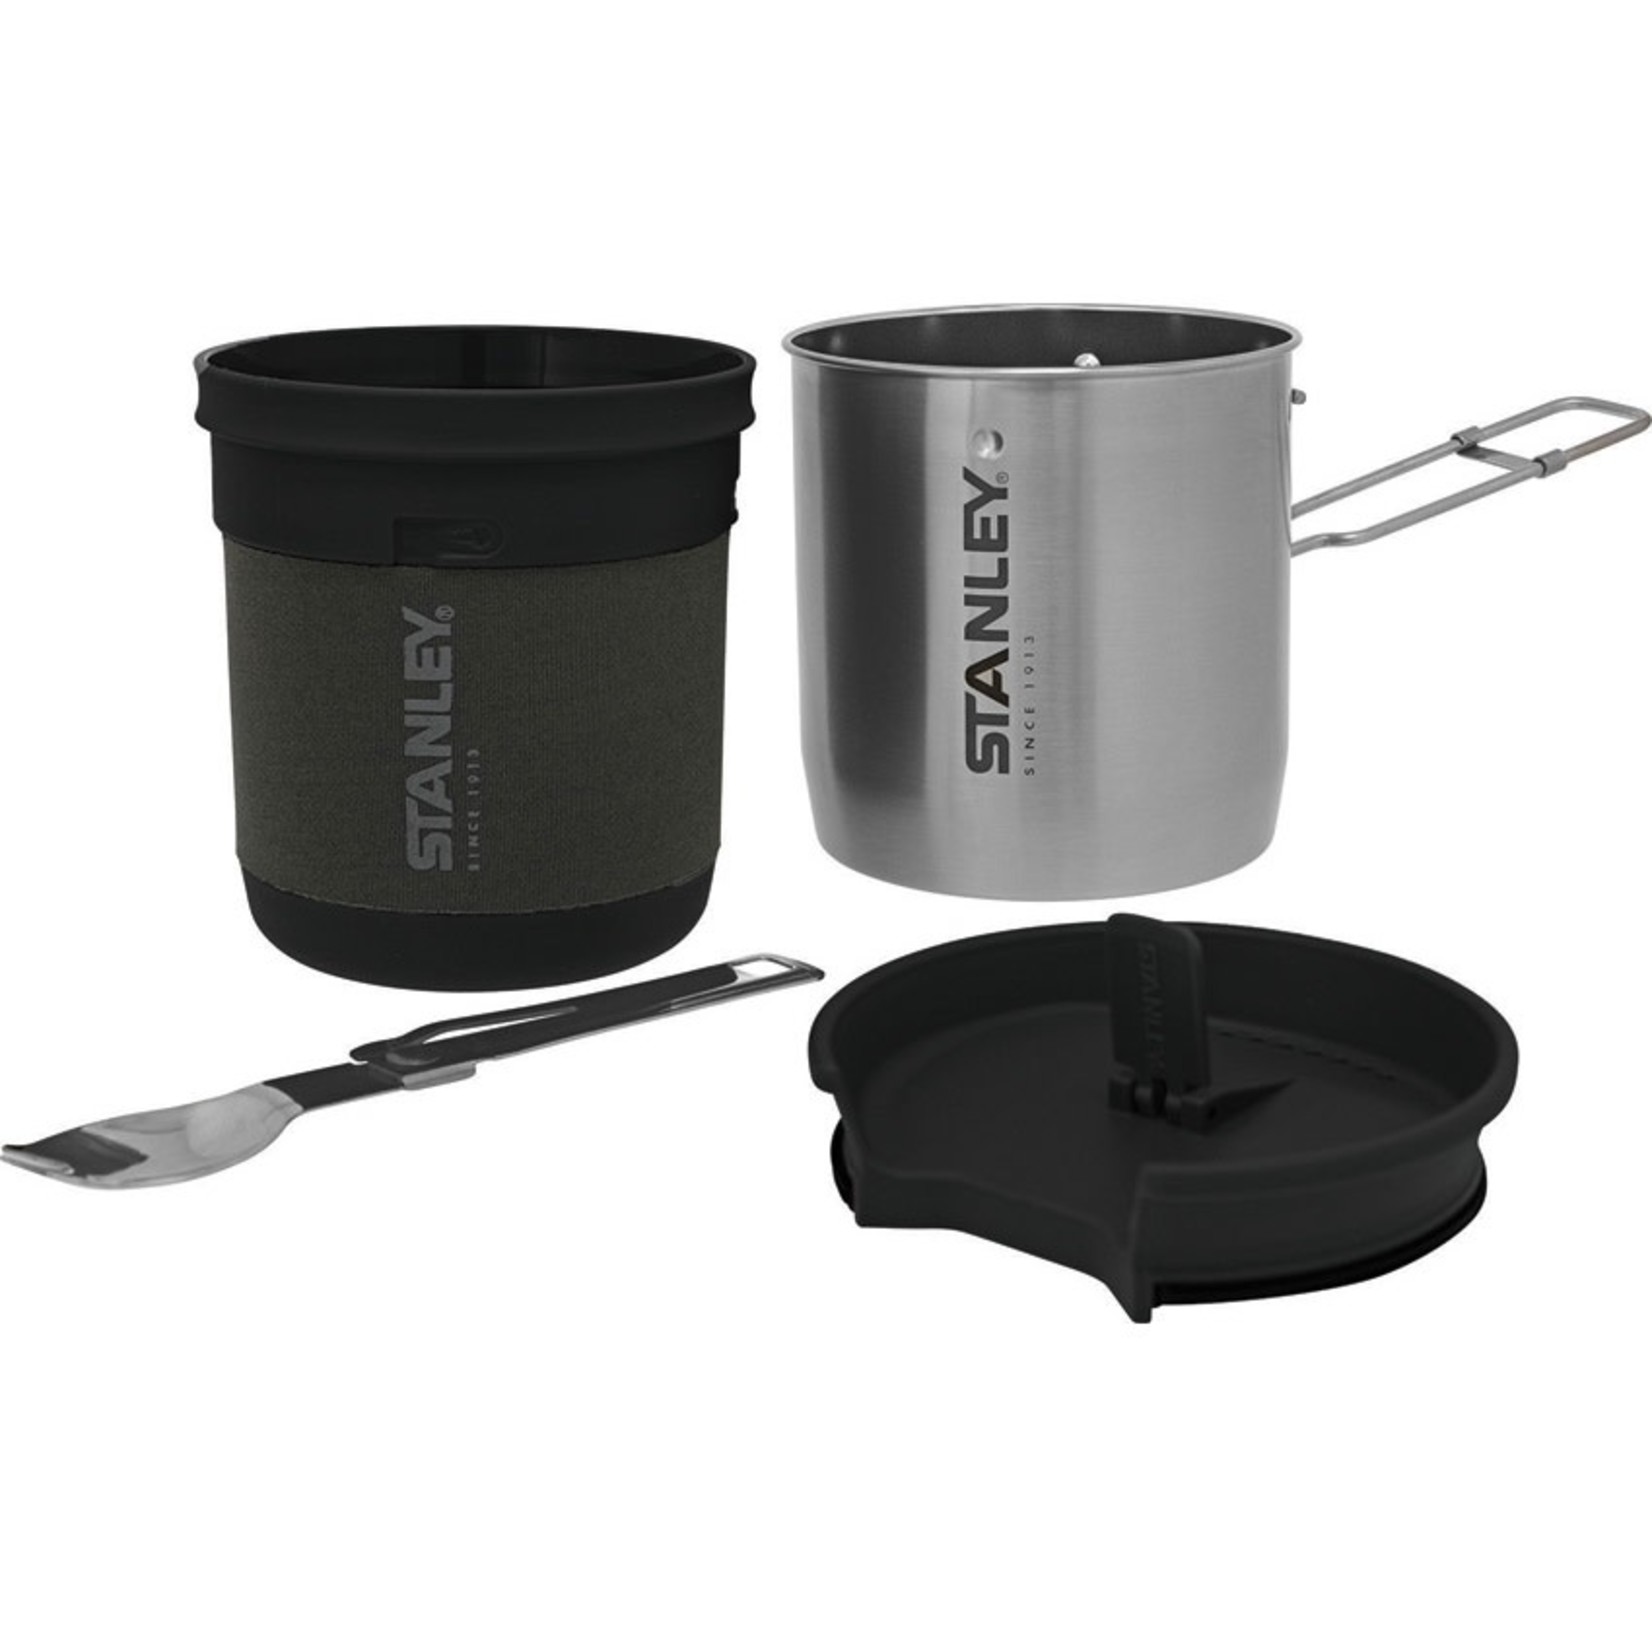 Stanley Stanley Compact Stainless Steel Cook Set - 24 oz.